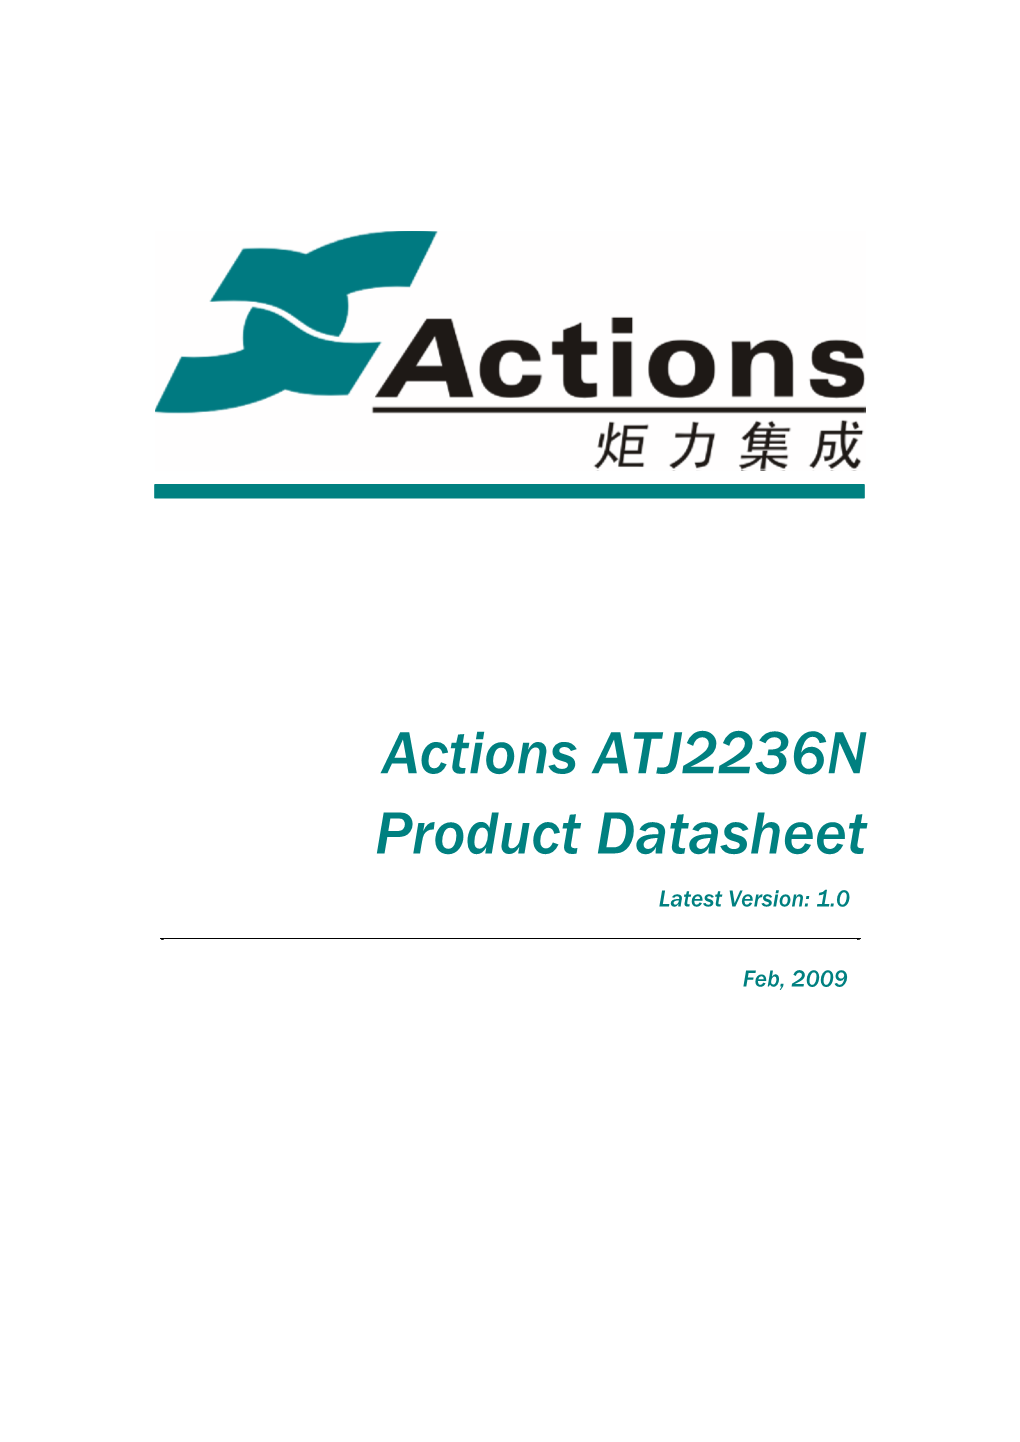 Actions ATJ2236N Product Datasheet Latest Version: 1.0